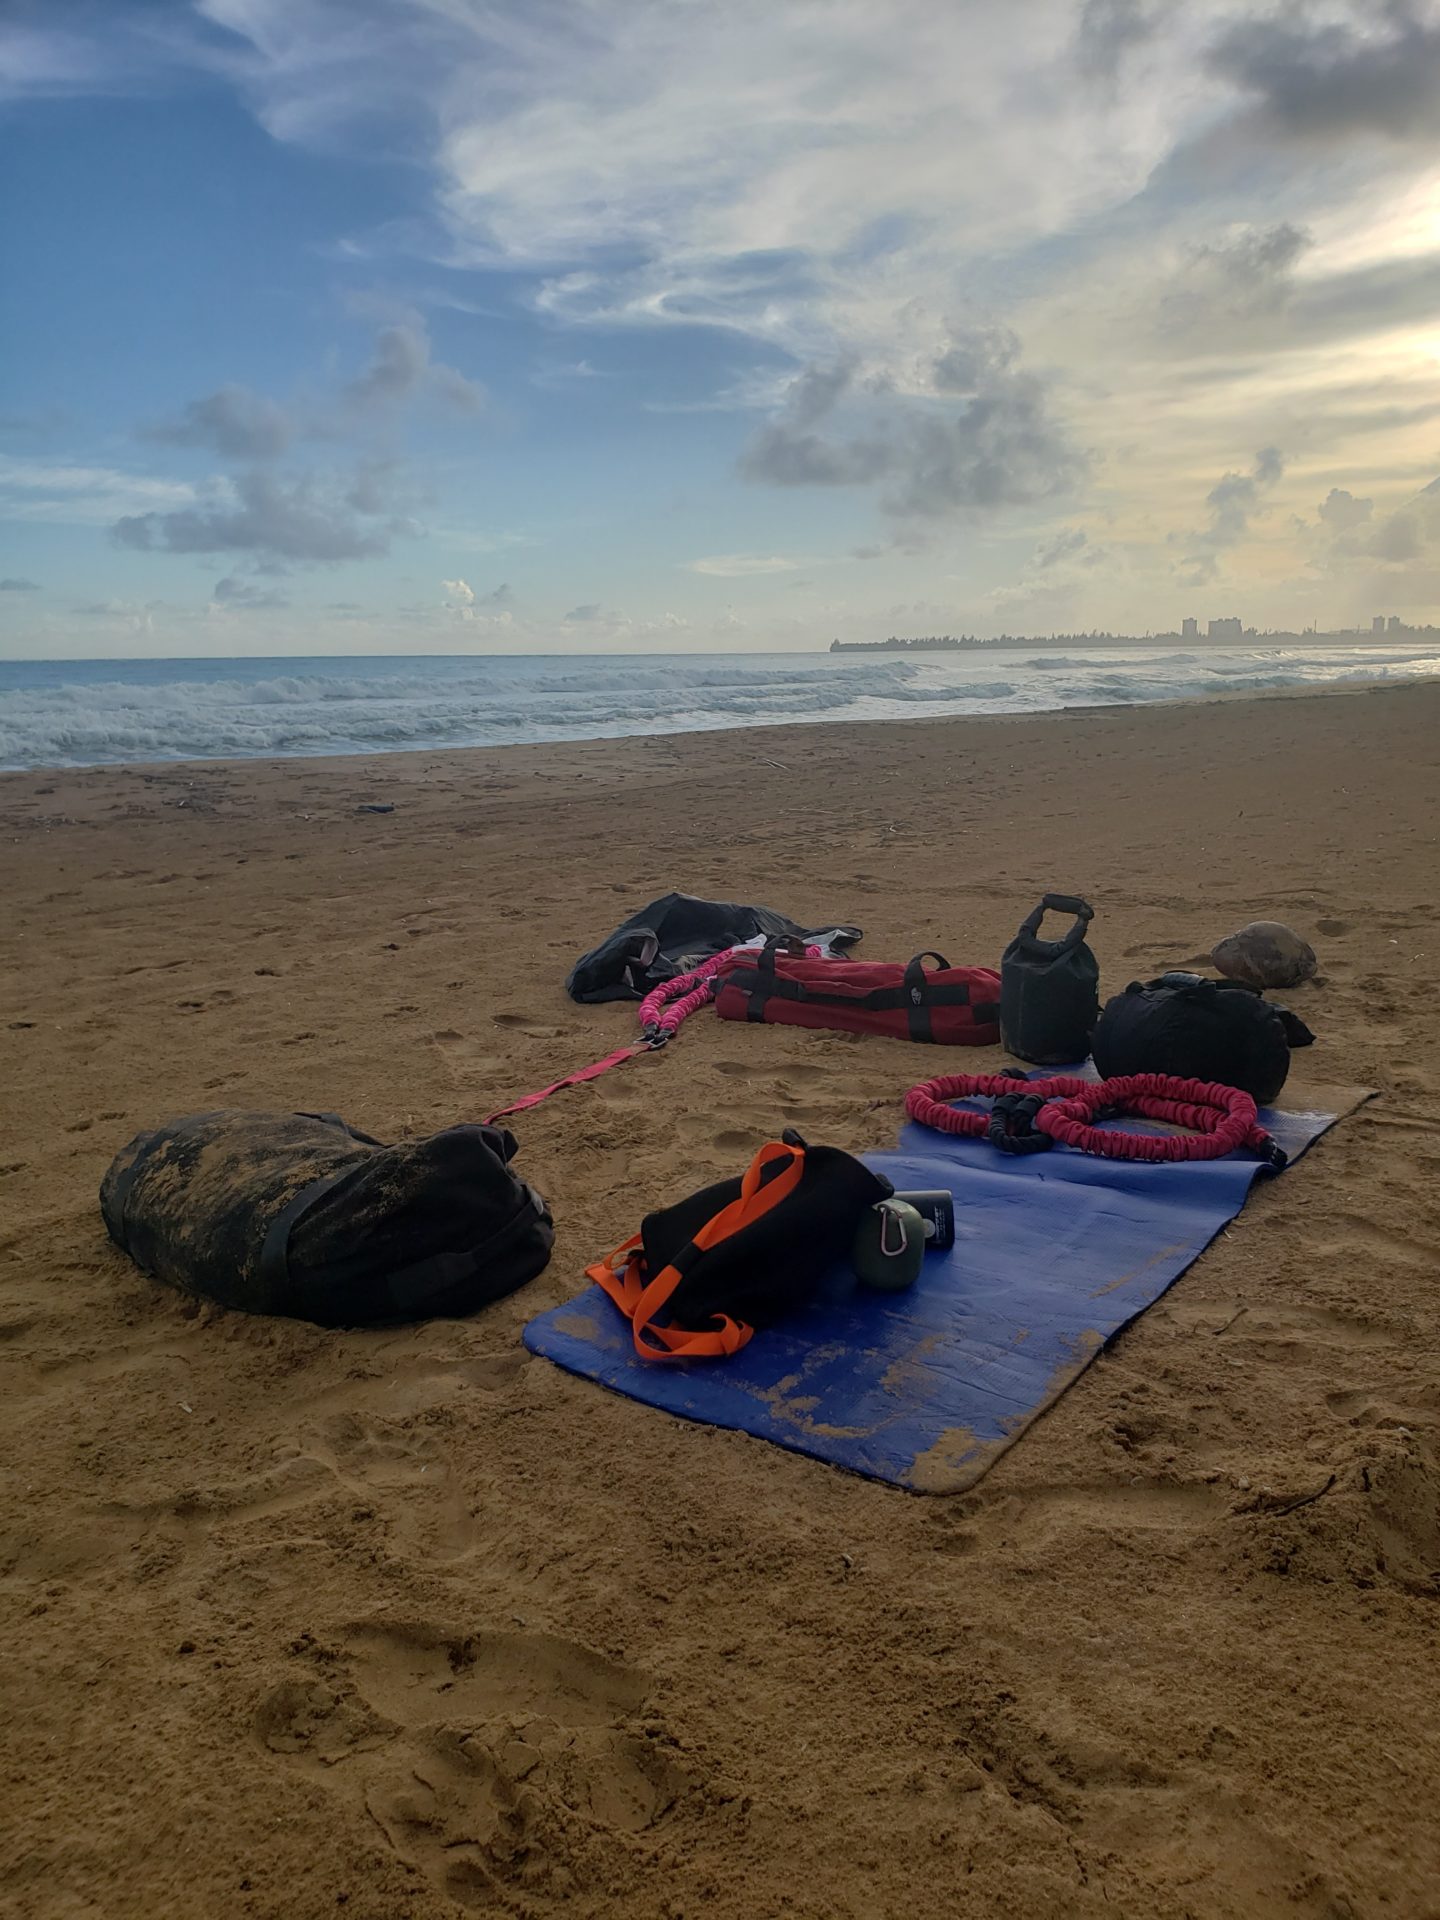 a group of bags on a beach